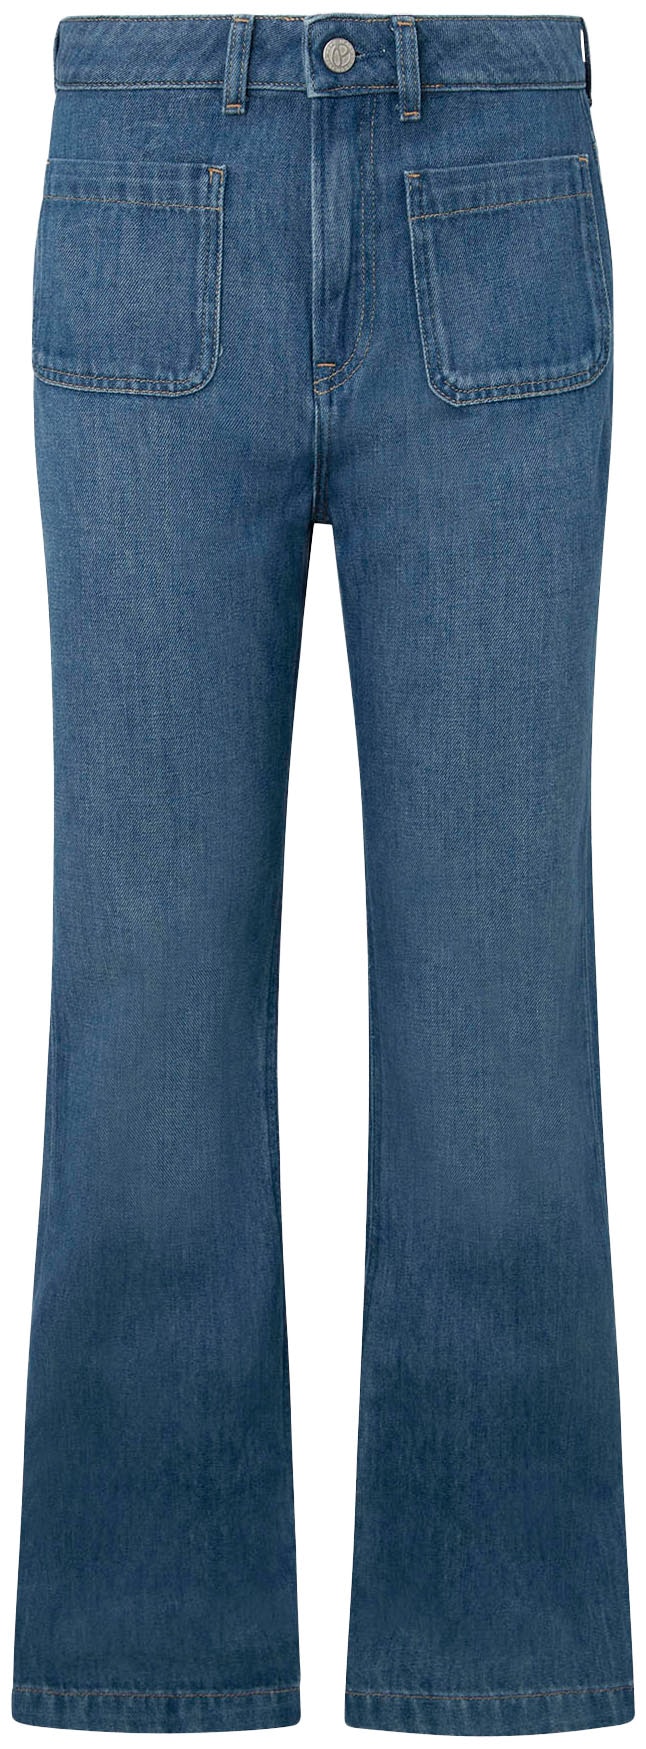 Pepe Jeans Slim-fit-Jeans »Jeans SLIM FIT FLARE UHW RETRO« von Pepe Jeans